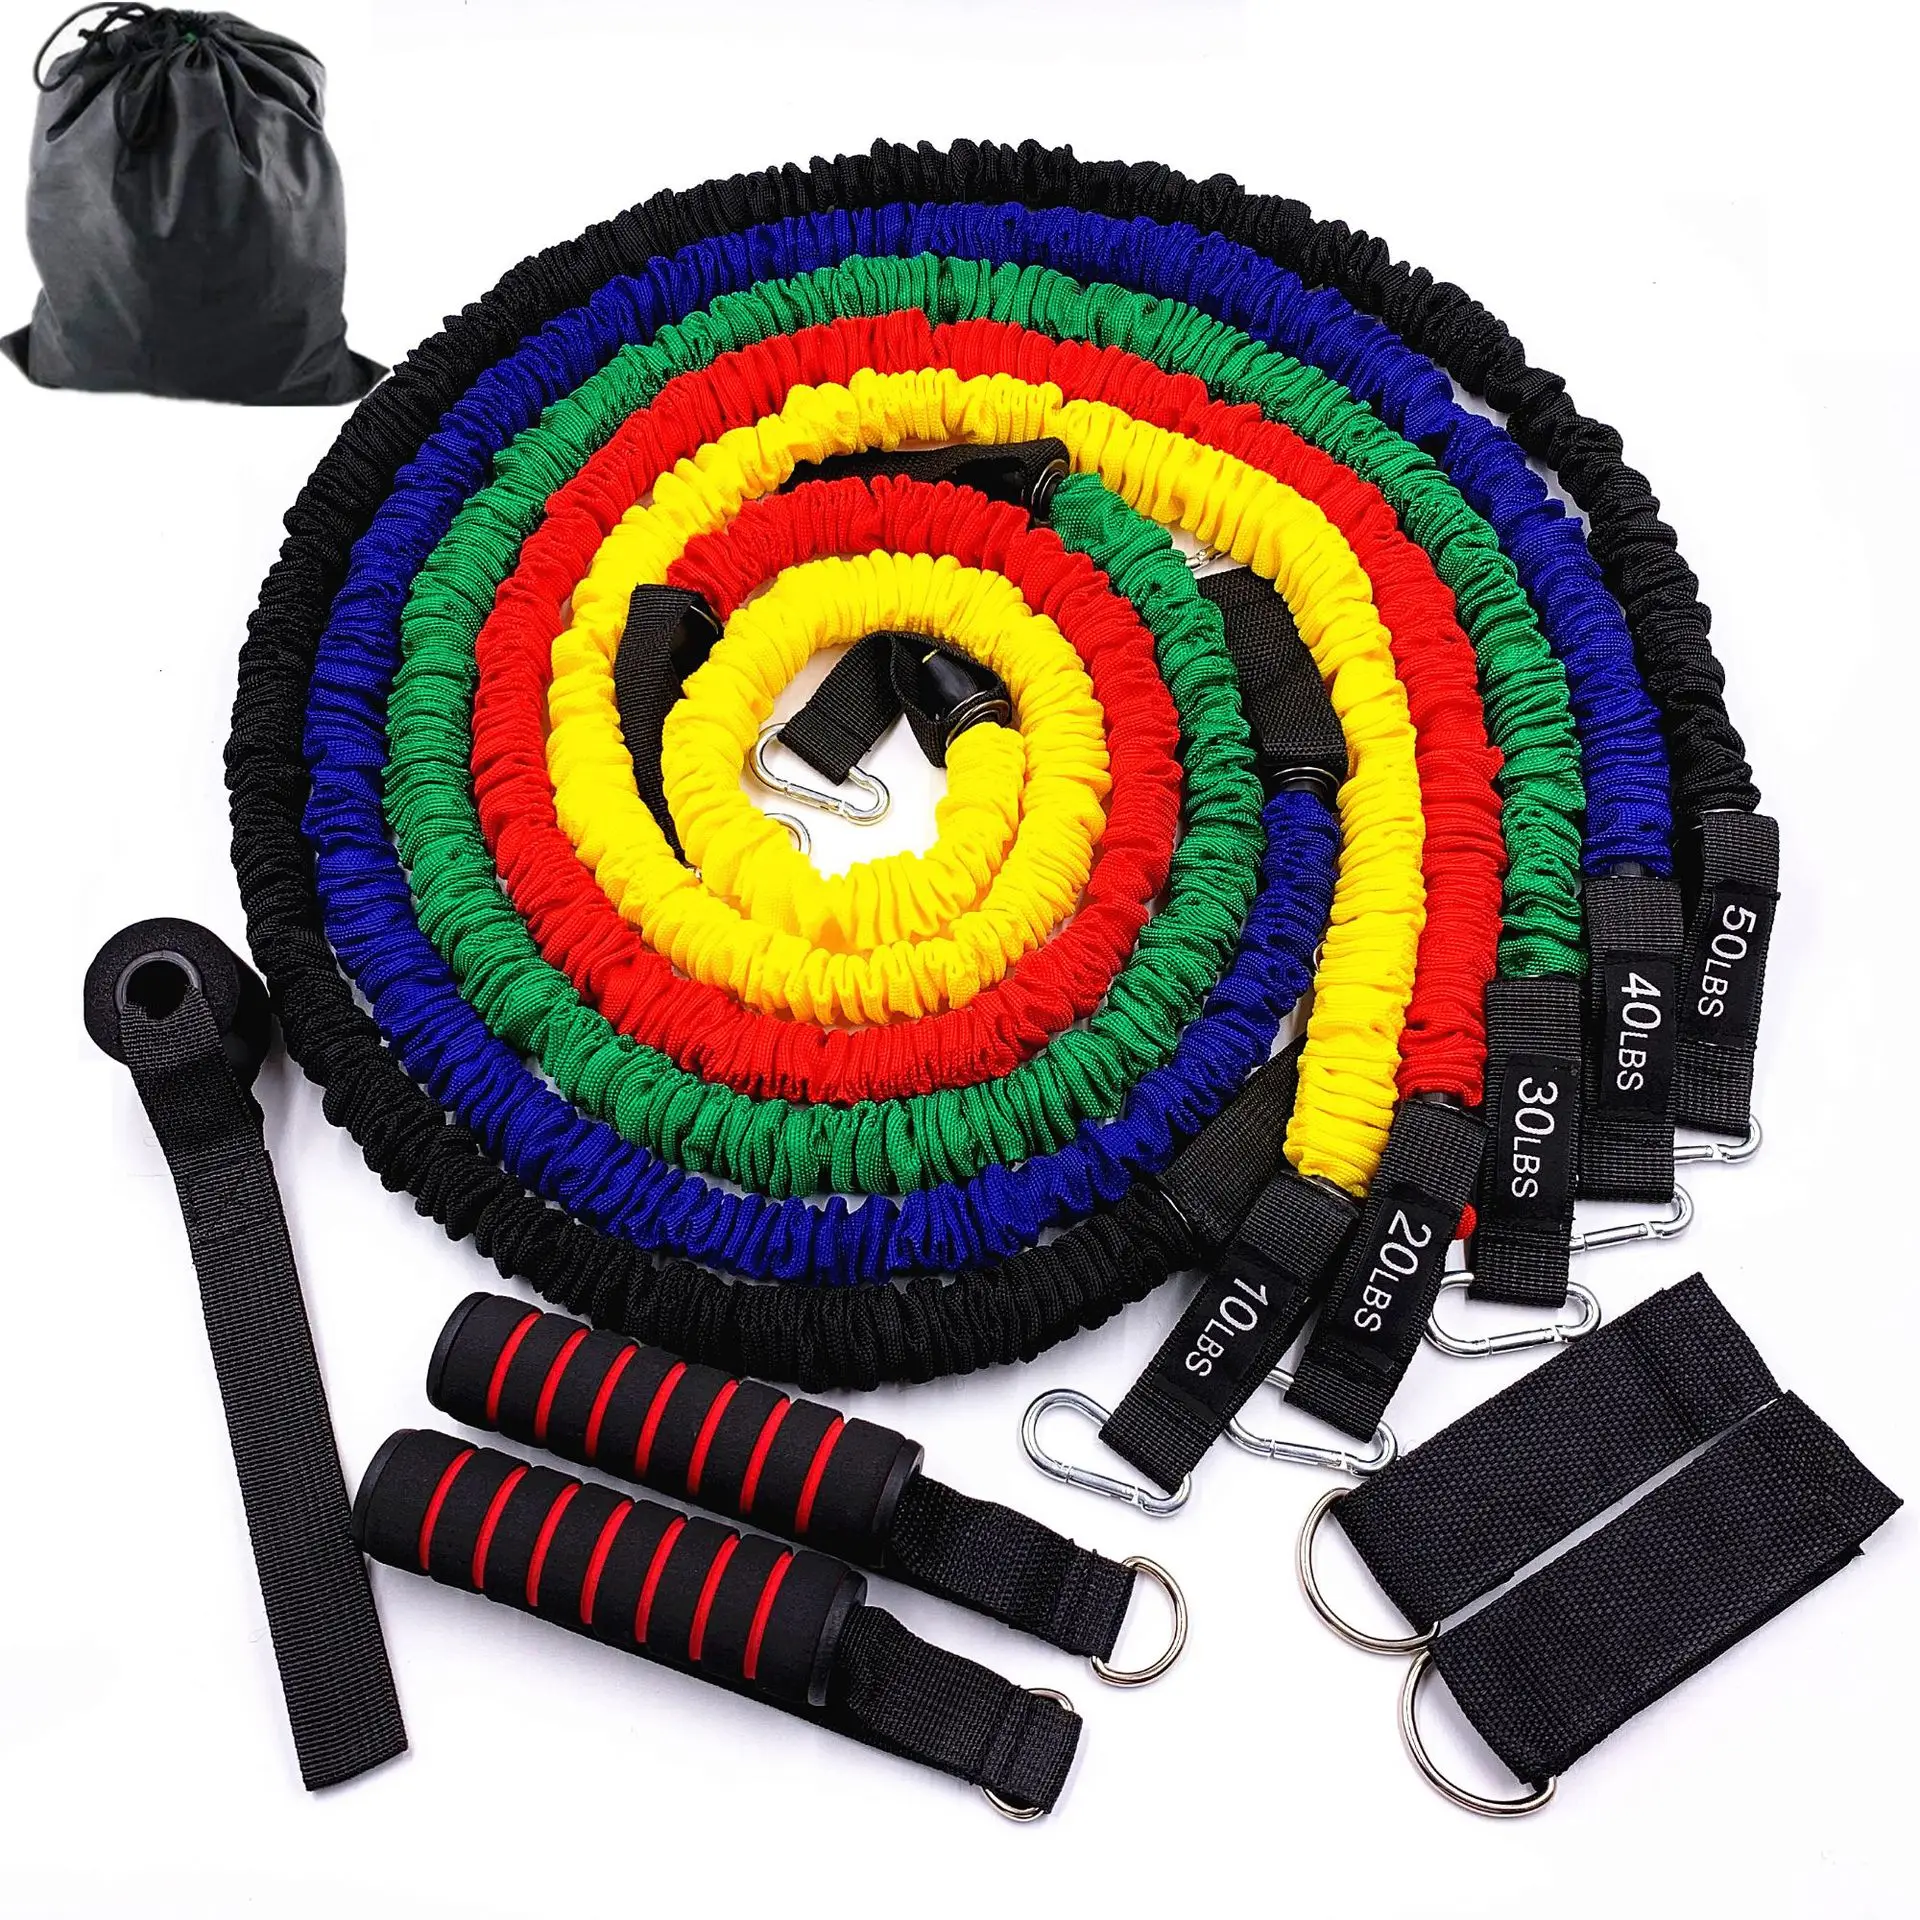 Resistance Bands Set Workout Exercise Gym Accessories